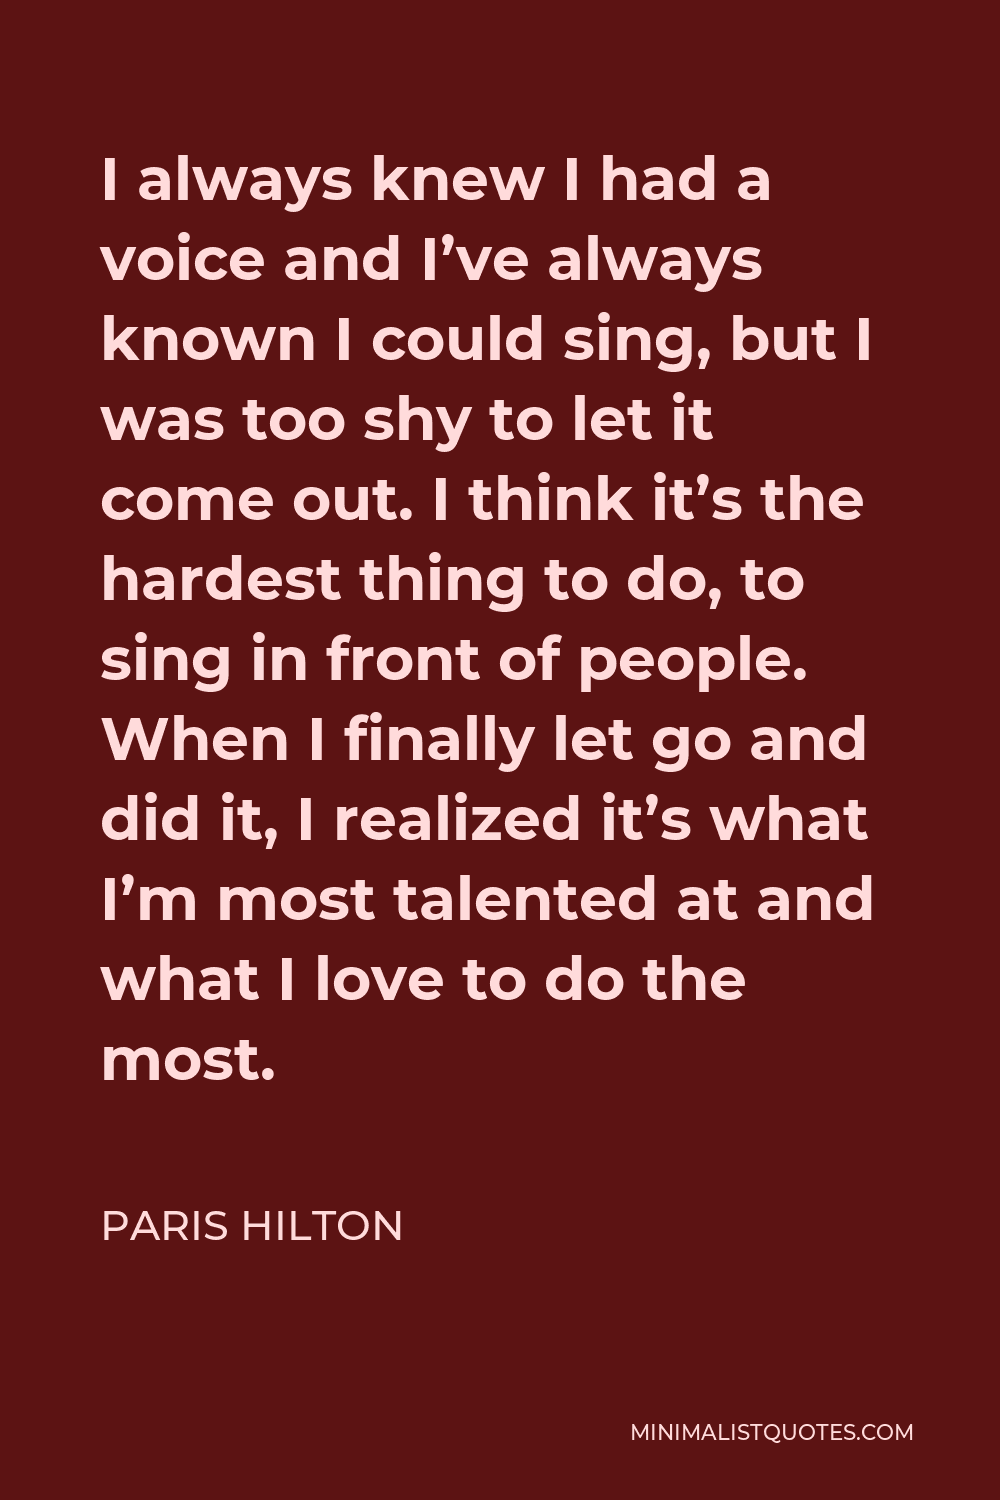 Paris Hilton Quote - I always knew I had a voice and I’ve always known I could sing, but I was too shy to let it come out. I think it’s the hardest thing to do, to sing in front of people. When I finally let go and did it, I realized it’s what I’m most talented at and what I love to do the most.